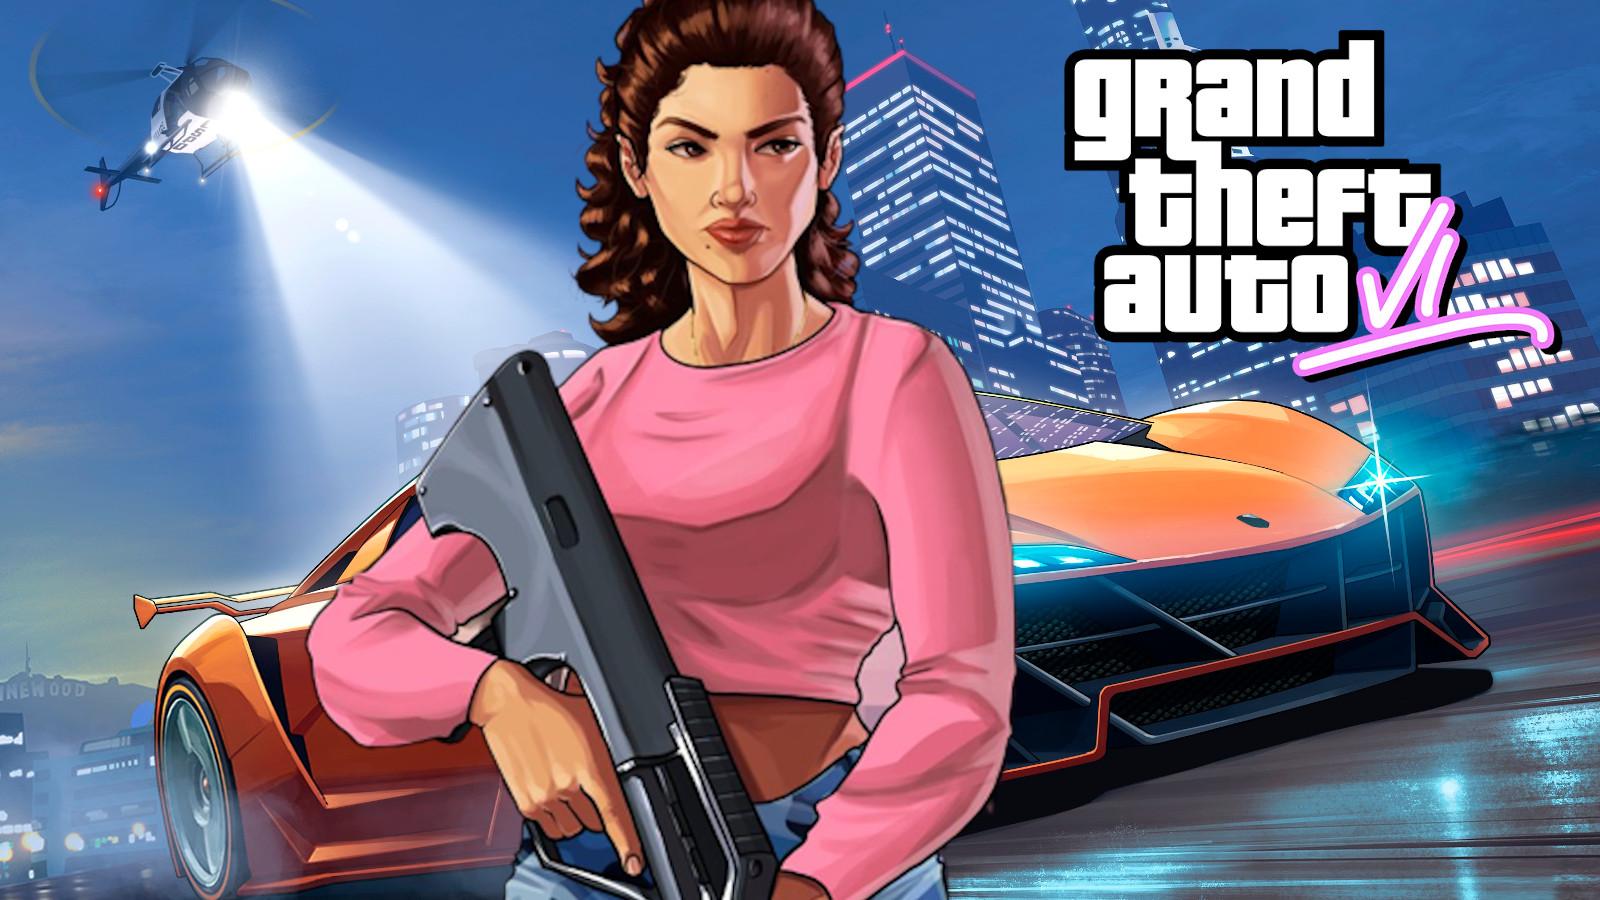 Internet Detective Figures Out the Location of GTA 6 - autoevolution